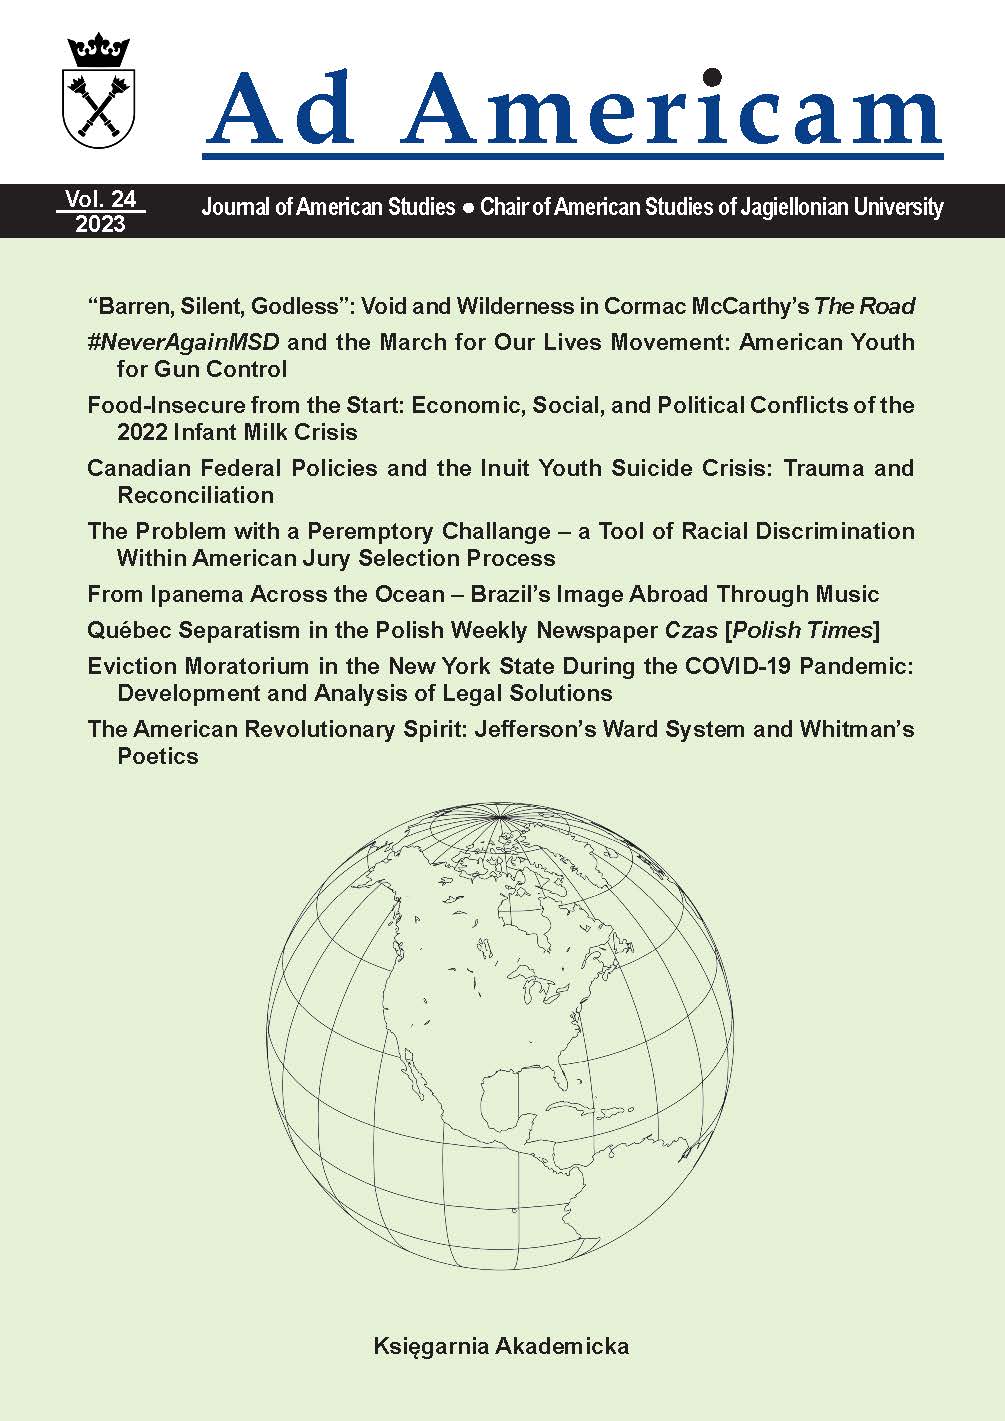 Eviction Moratorium
in the New York State
During the COVID-19 Pandemic Development and Analysis of Legal Solutions